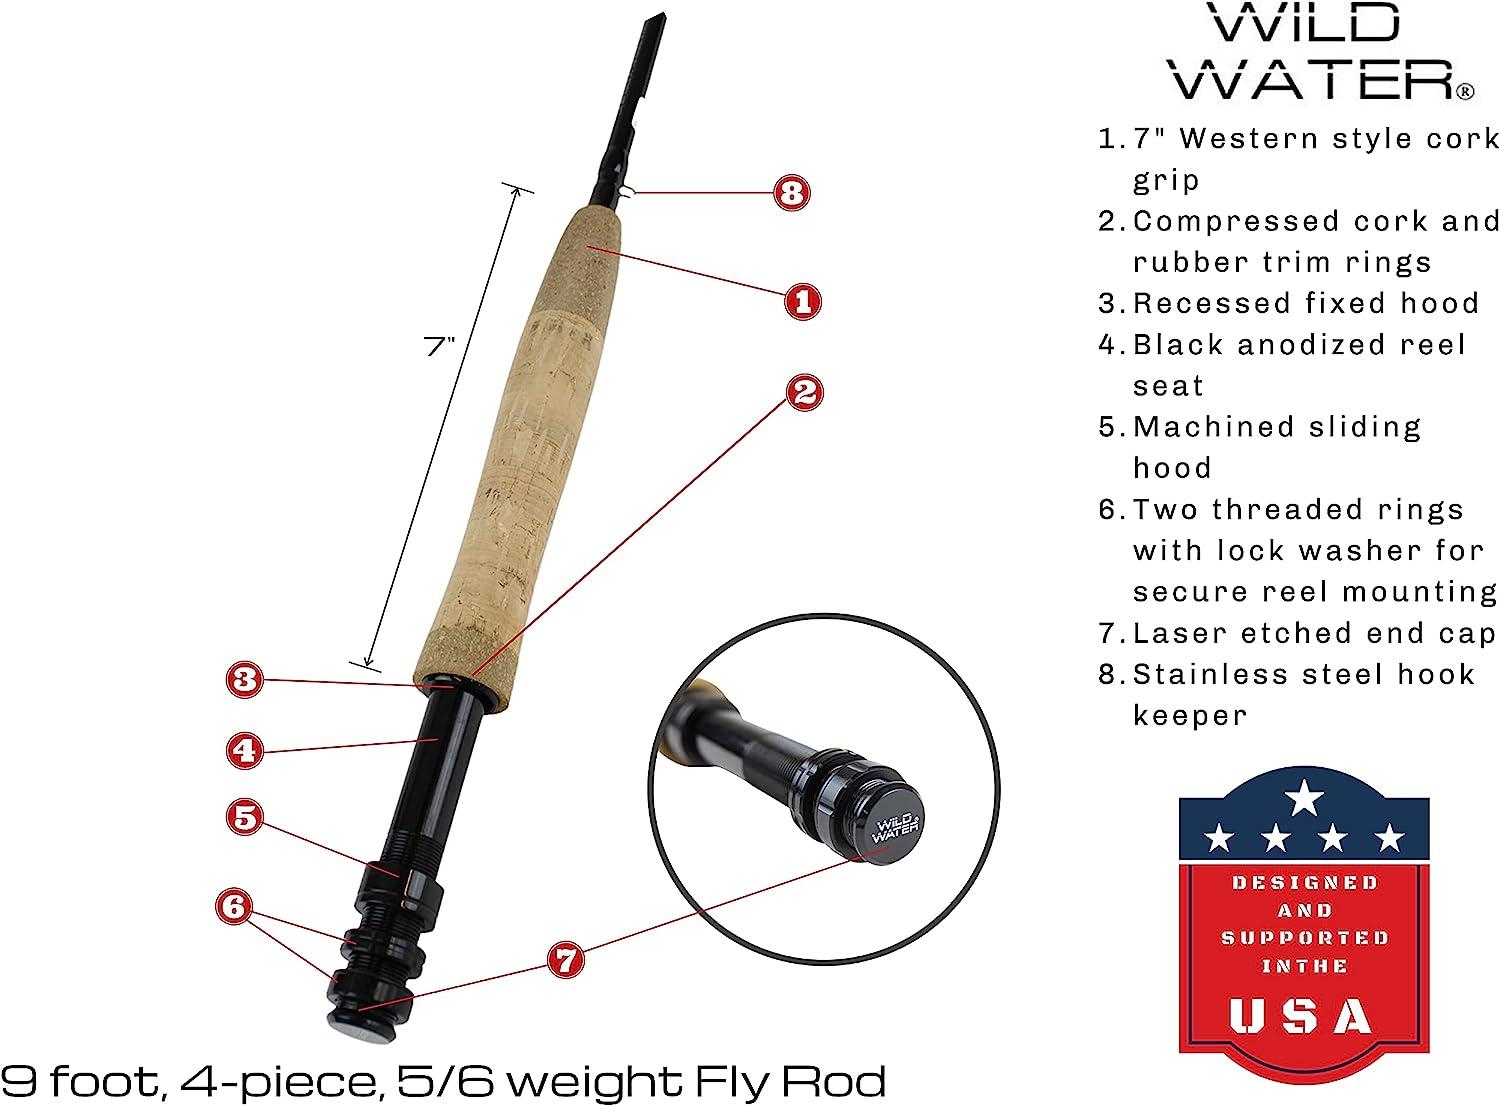 Wild Water Fly Fishing AX Series Fly Rod, IM8 Graphite Blank, 3/4/5/6/7/8/9/10/12  wt Rods, 56/7/8/9/10/11 ft